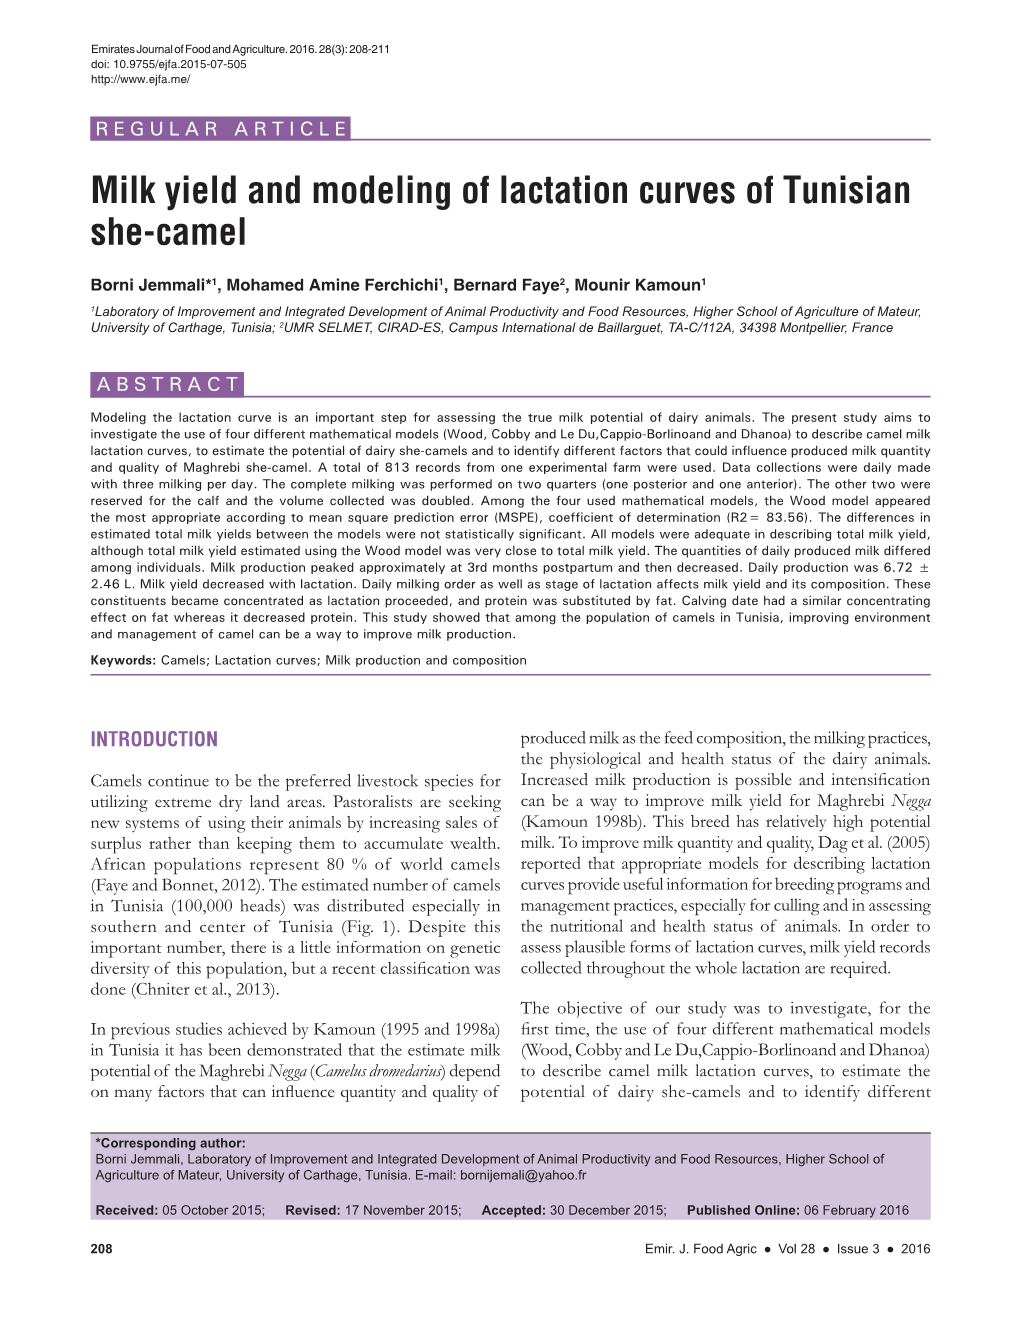 Milk Yield and Modeling of Lactation Curves of Tunisian She-Camel